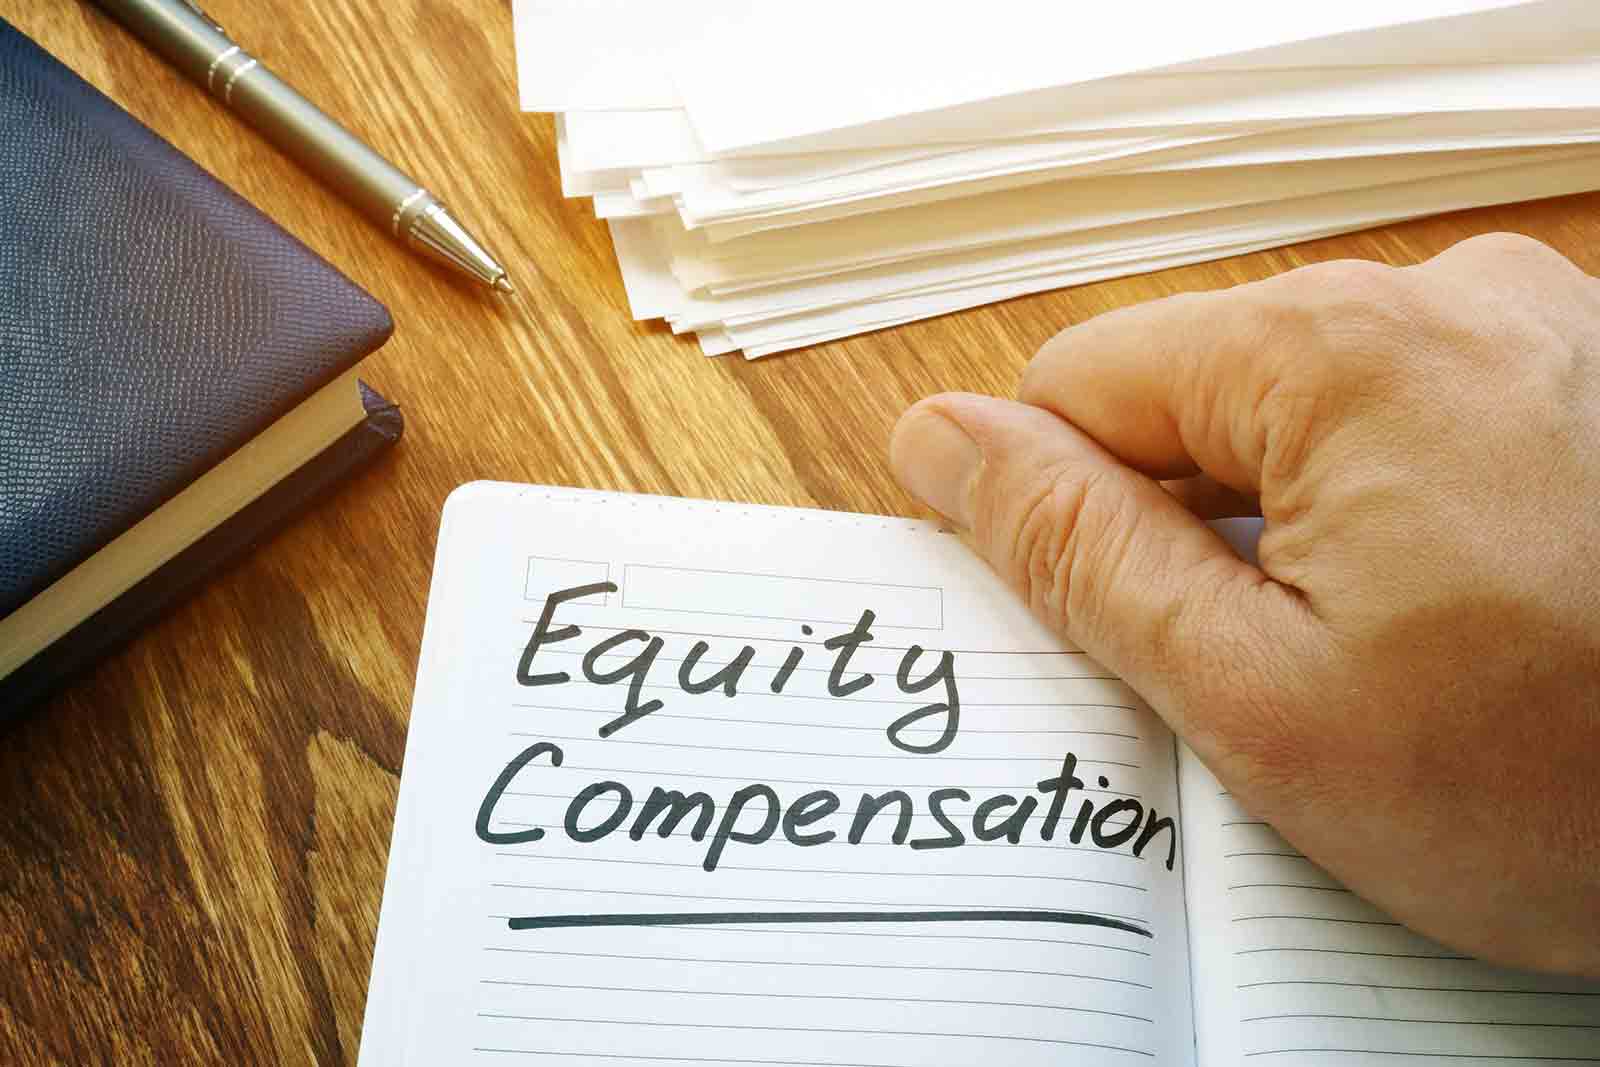 Holding a notebook reading "Equity Compensation"